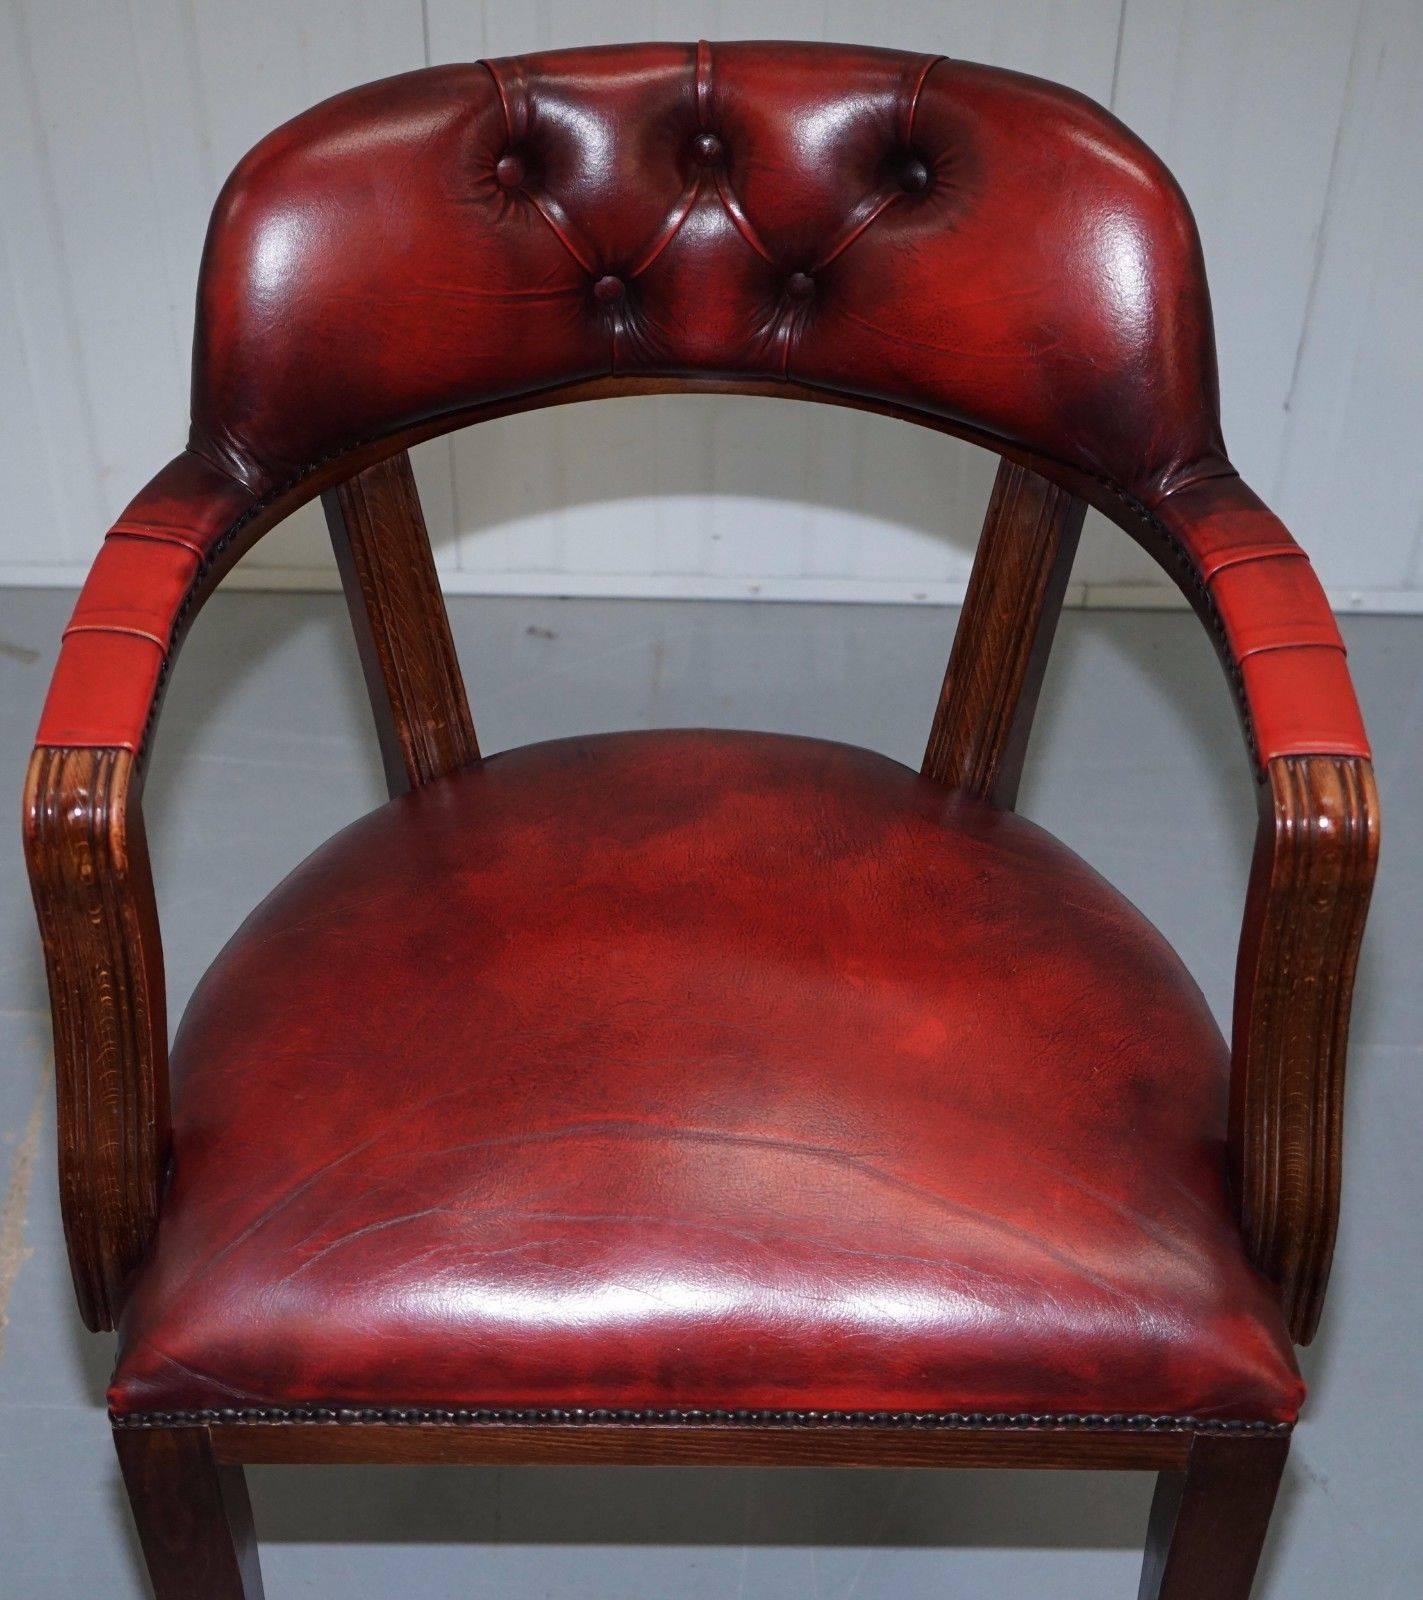 Victorian Lovely Oxblood Leather Chesterfield Court Chair for Desks or Guests Lovely Find